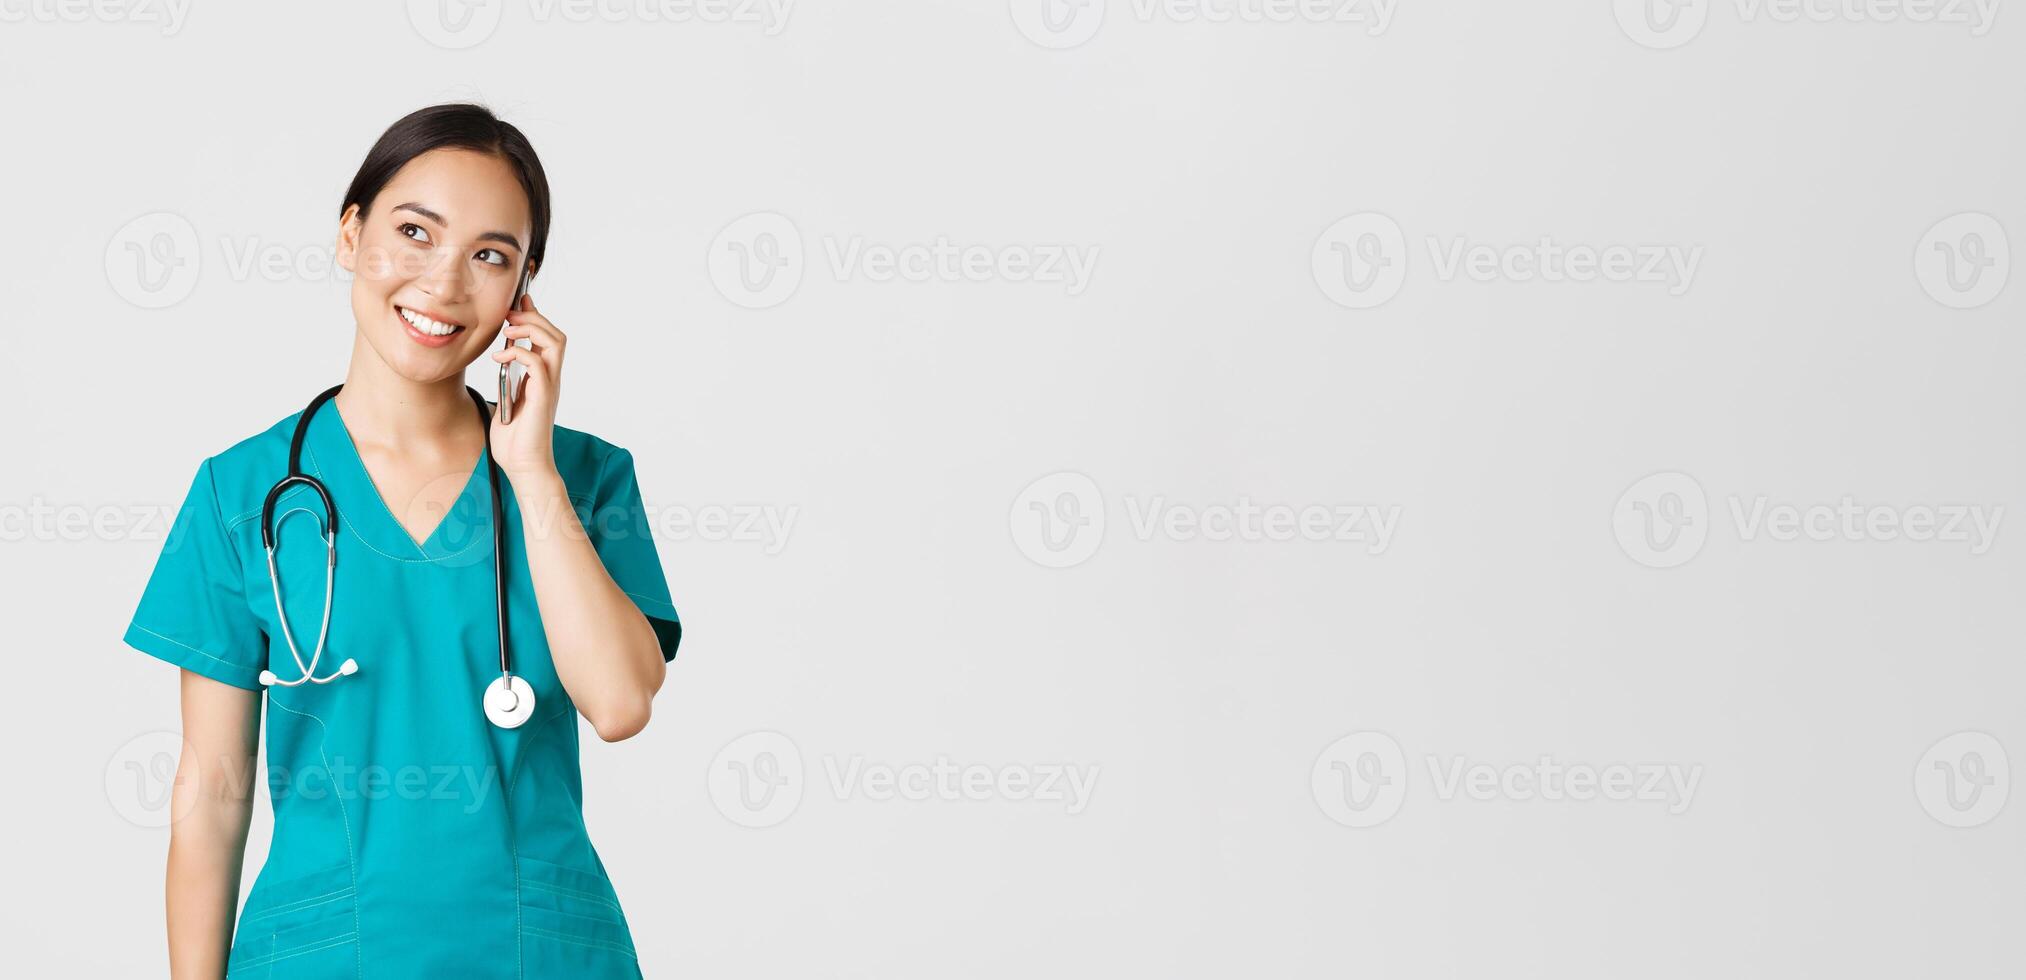 Covid-19, healthcare workers and preventing virus concept. Pretty smiling asian female doctor, physician in scrubs having conversation, talking on phone and looking upper left corner dreamy photo